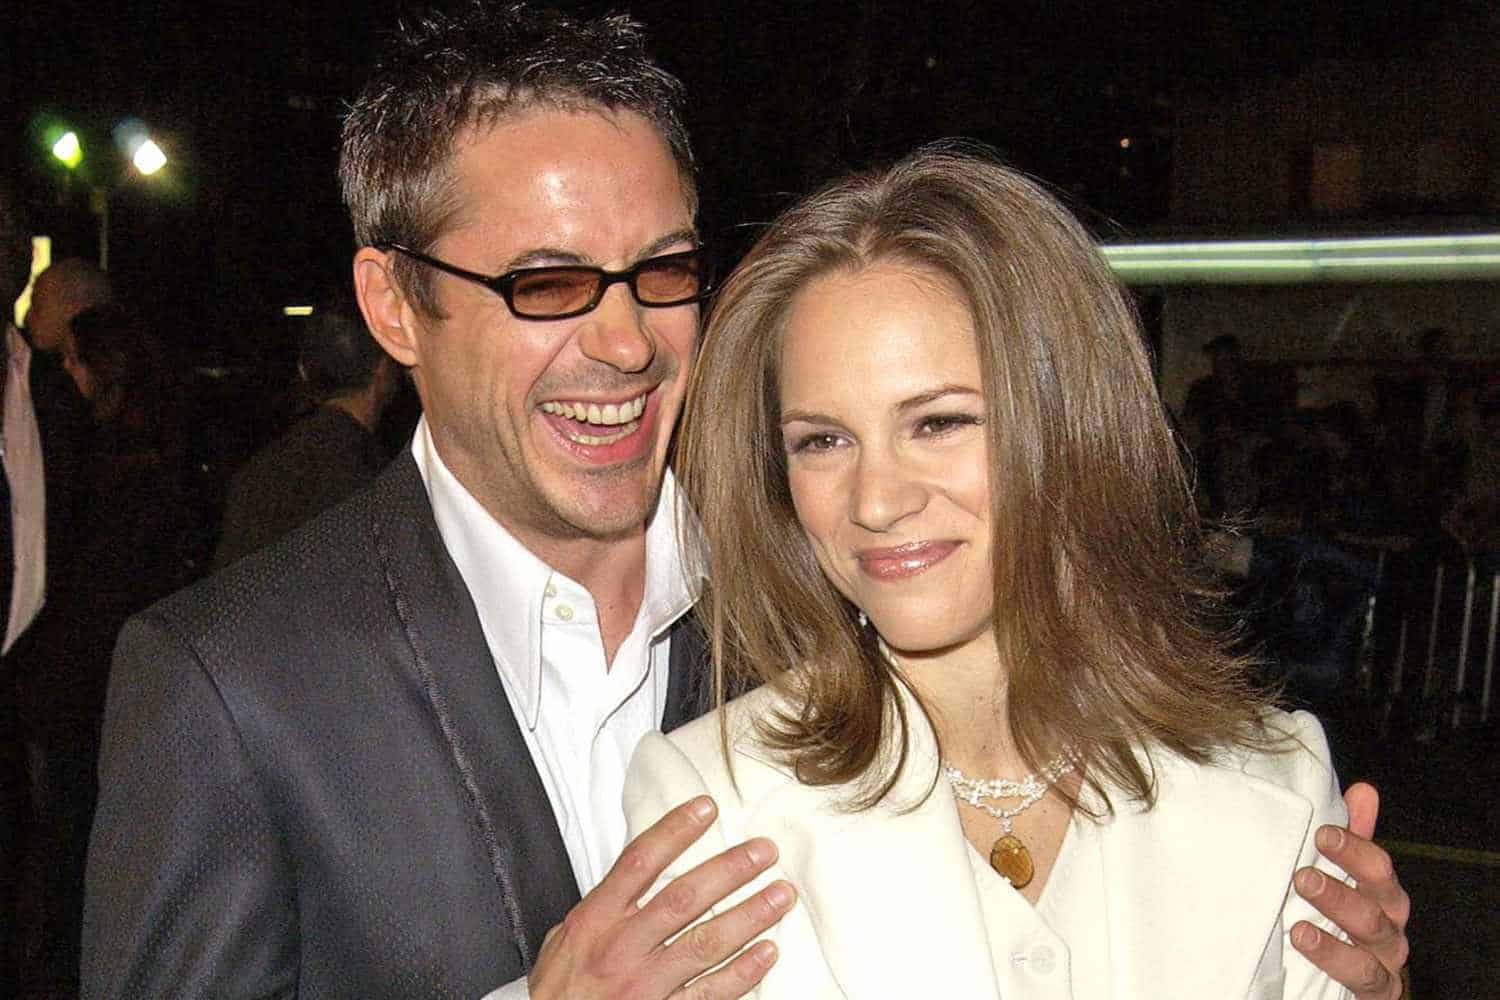 Robert Downey Jr. with his wife, Susan Downey (Credits: People)